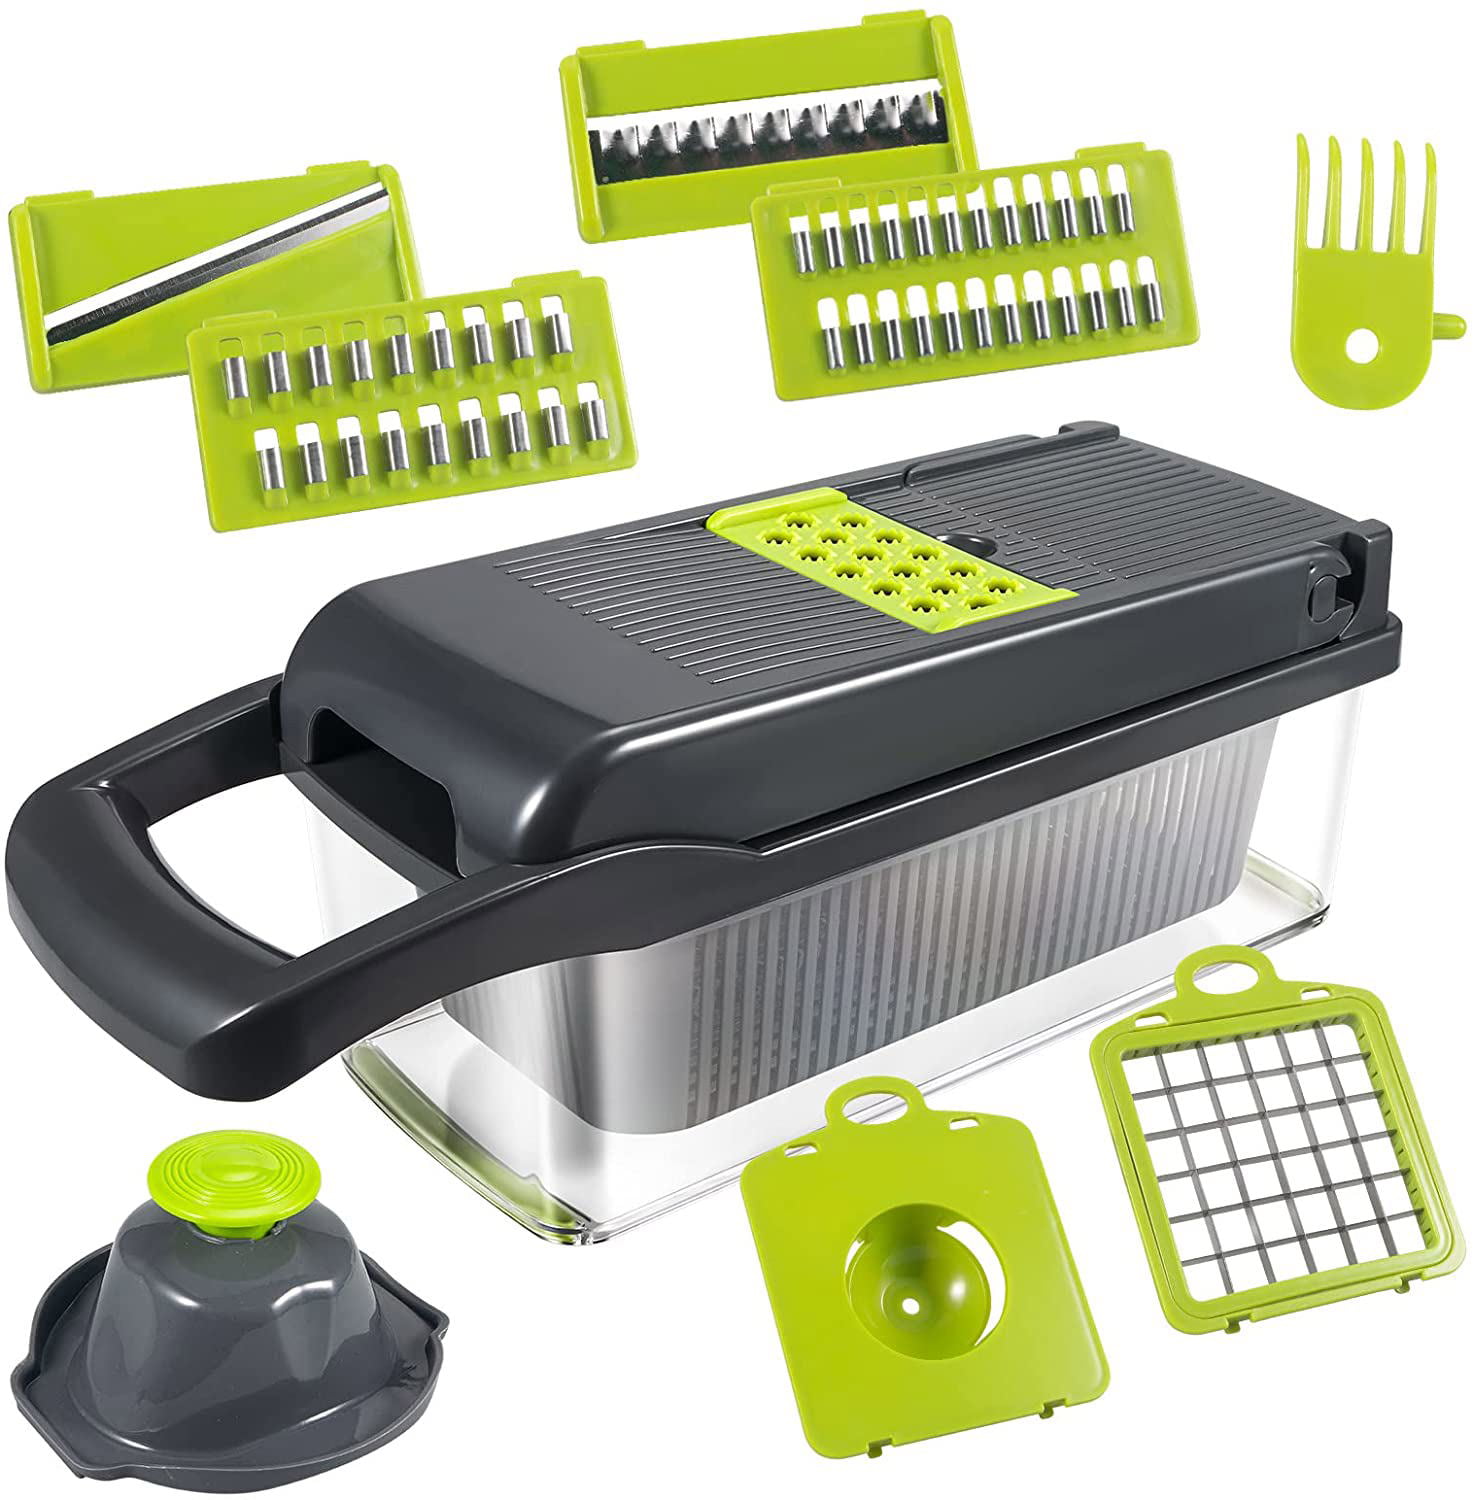 Vegetable Chopper Pro Onion Chopper by Bellemain Heaviest Duty, Vegetable  Dicer Includes Interchangeable Inserts for 1/4 Dice, 1/2 Dice ; 1/4  Julienne, Catchment/Storage Container, - Bellemain